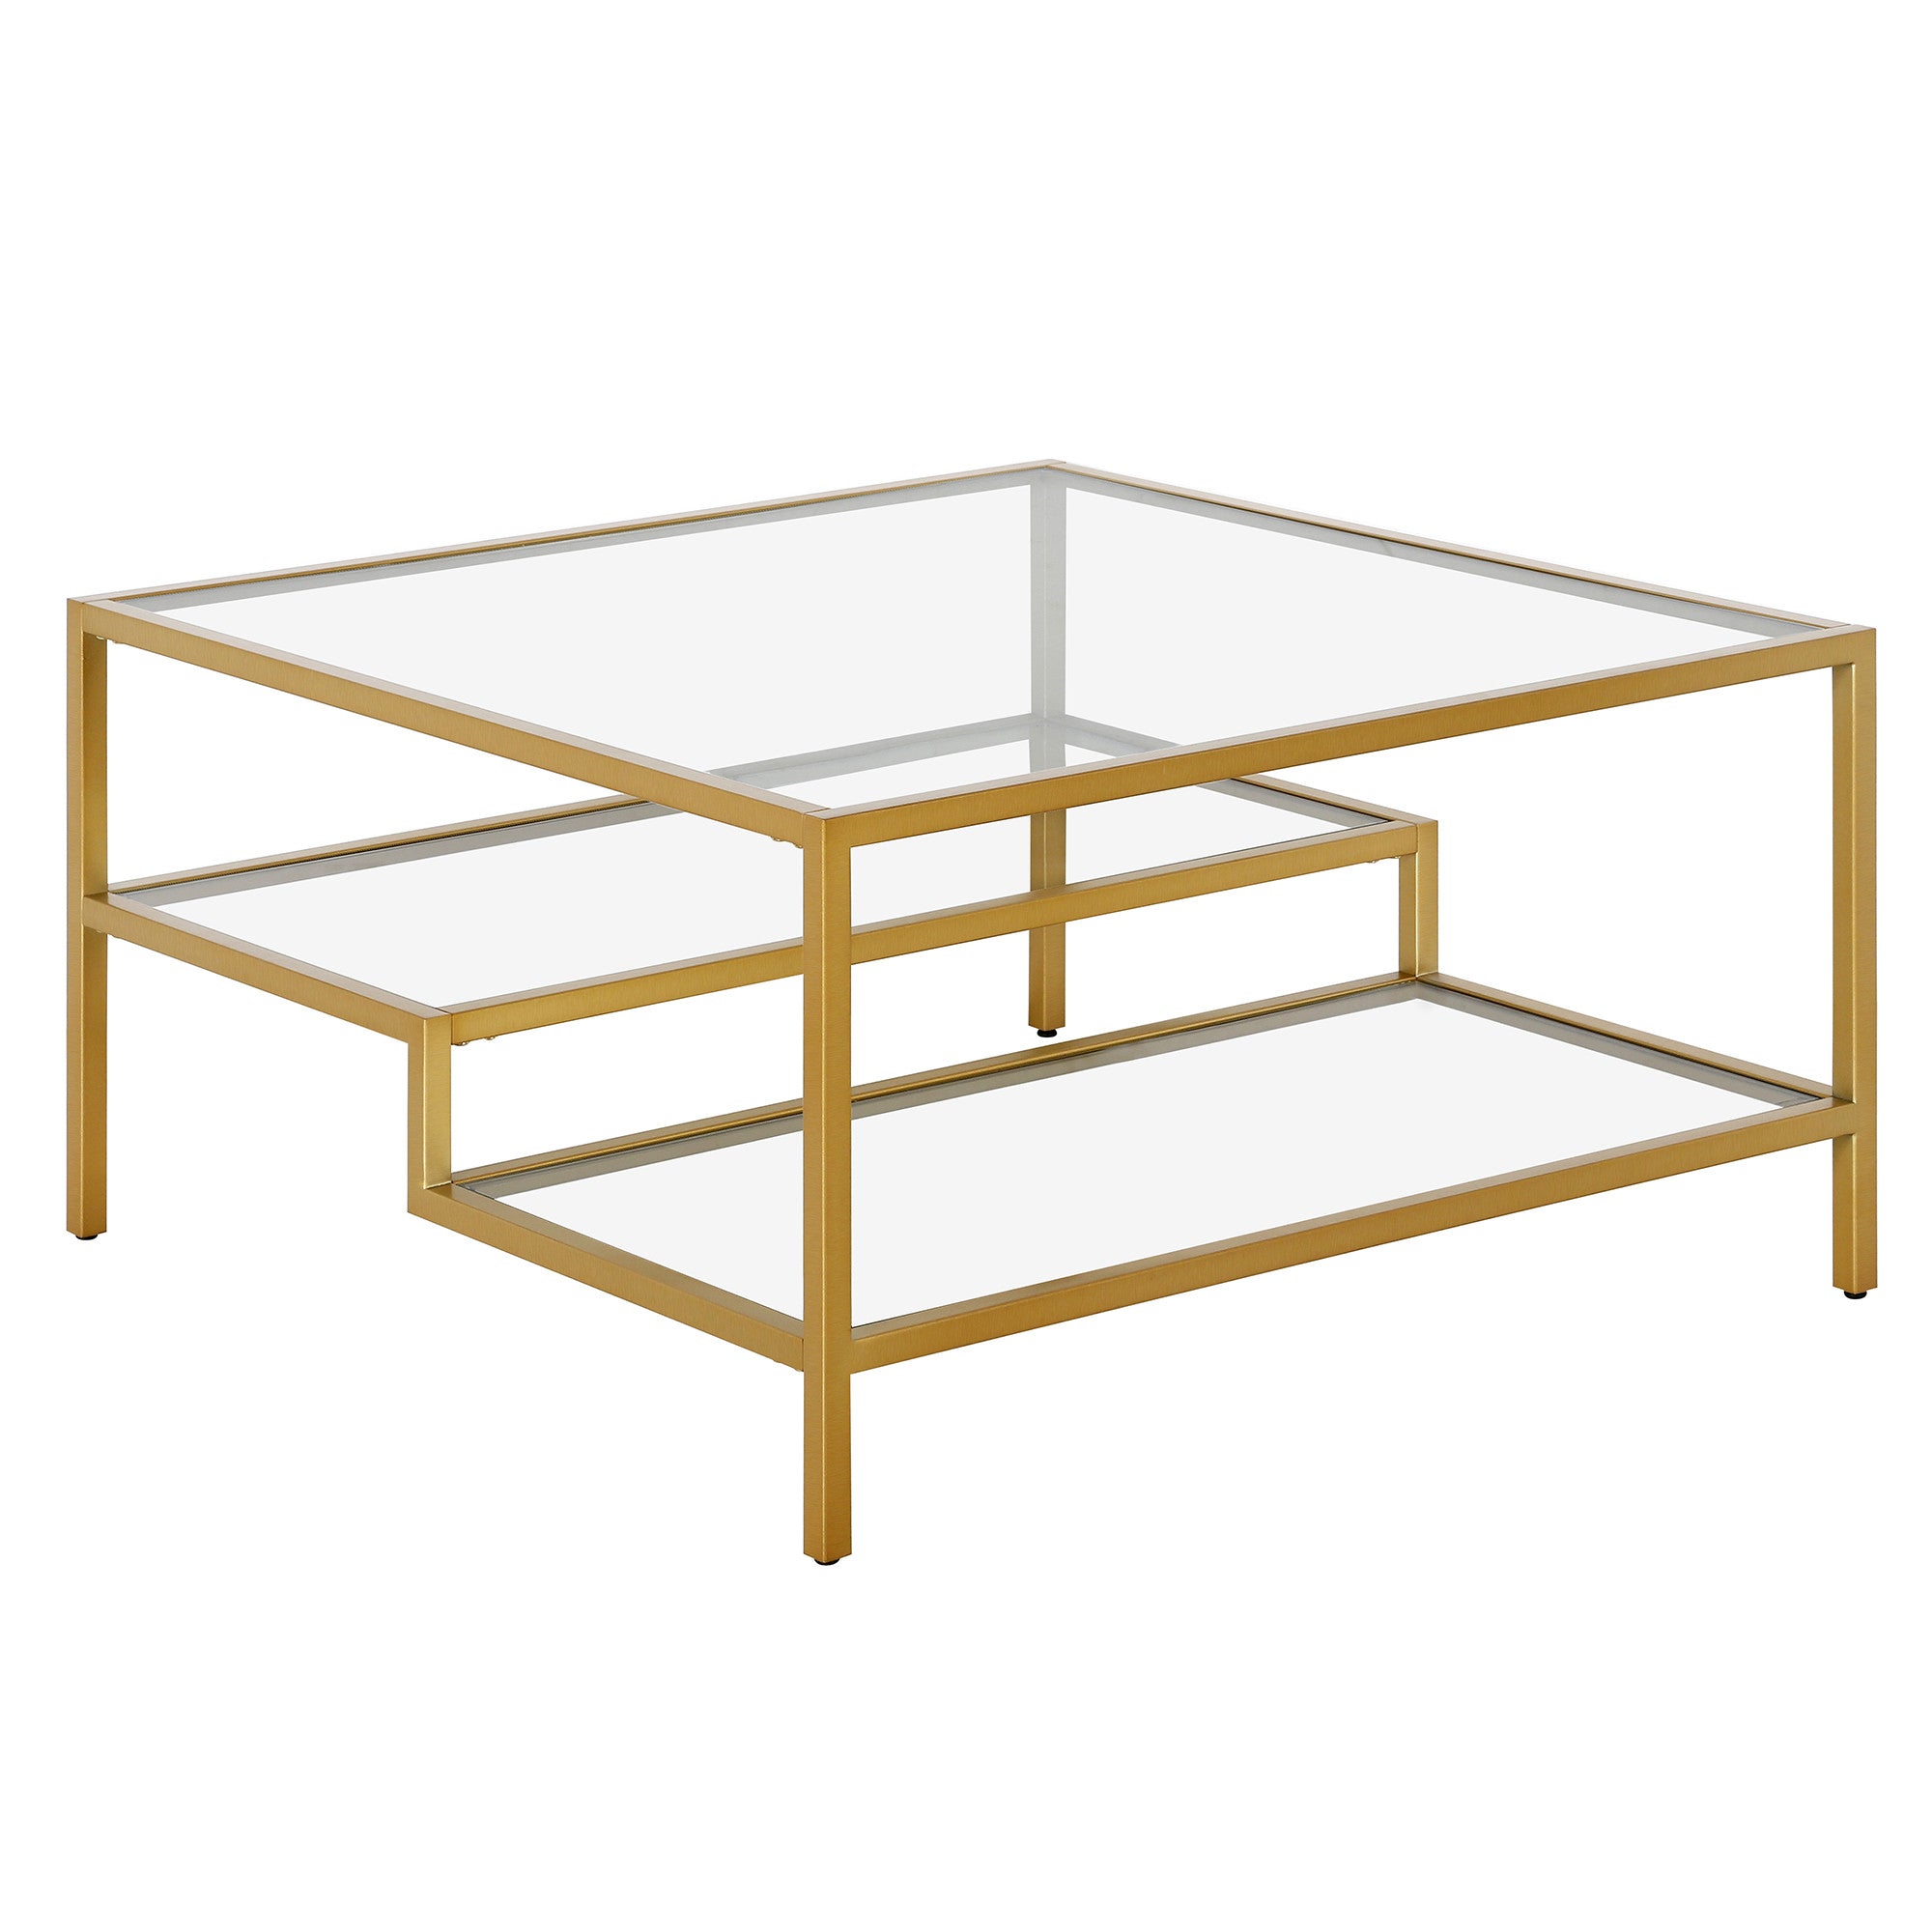 32" Gold Glass And Steel Square Coffee Table With Two Shelves